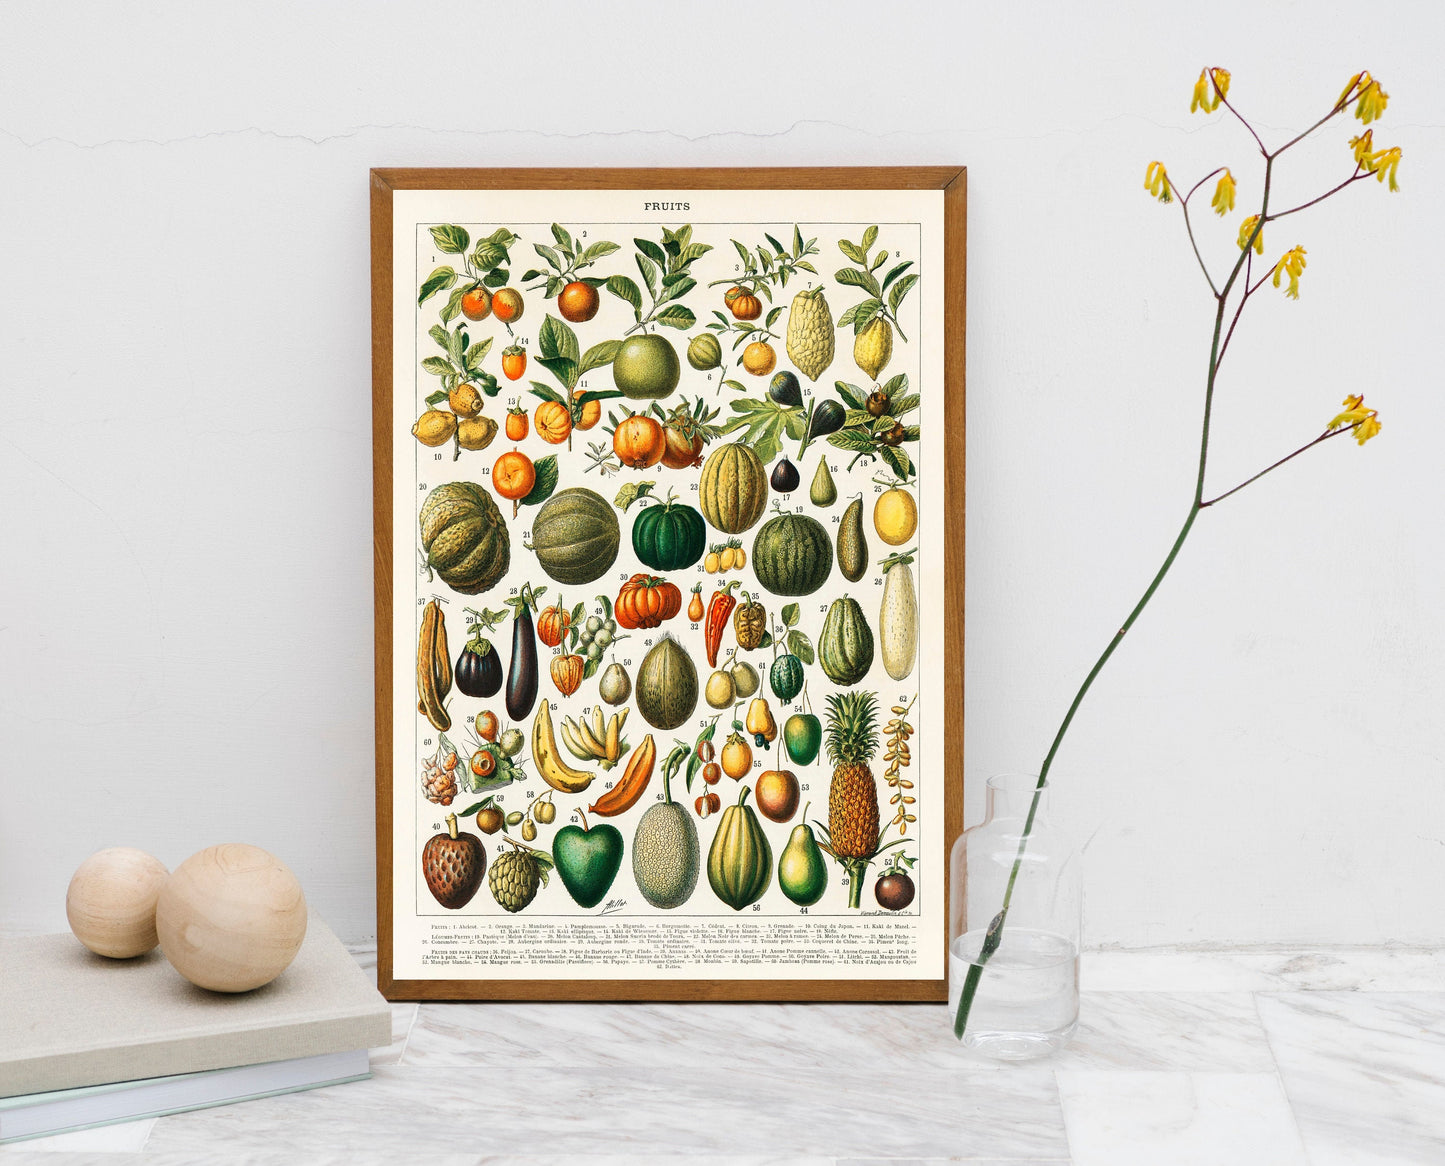 A vintage illustration of a wide variety of fruits and vegetables Chart Guide Print Poster Wall Hanging Decor